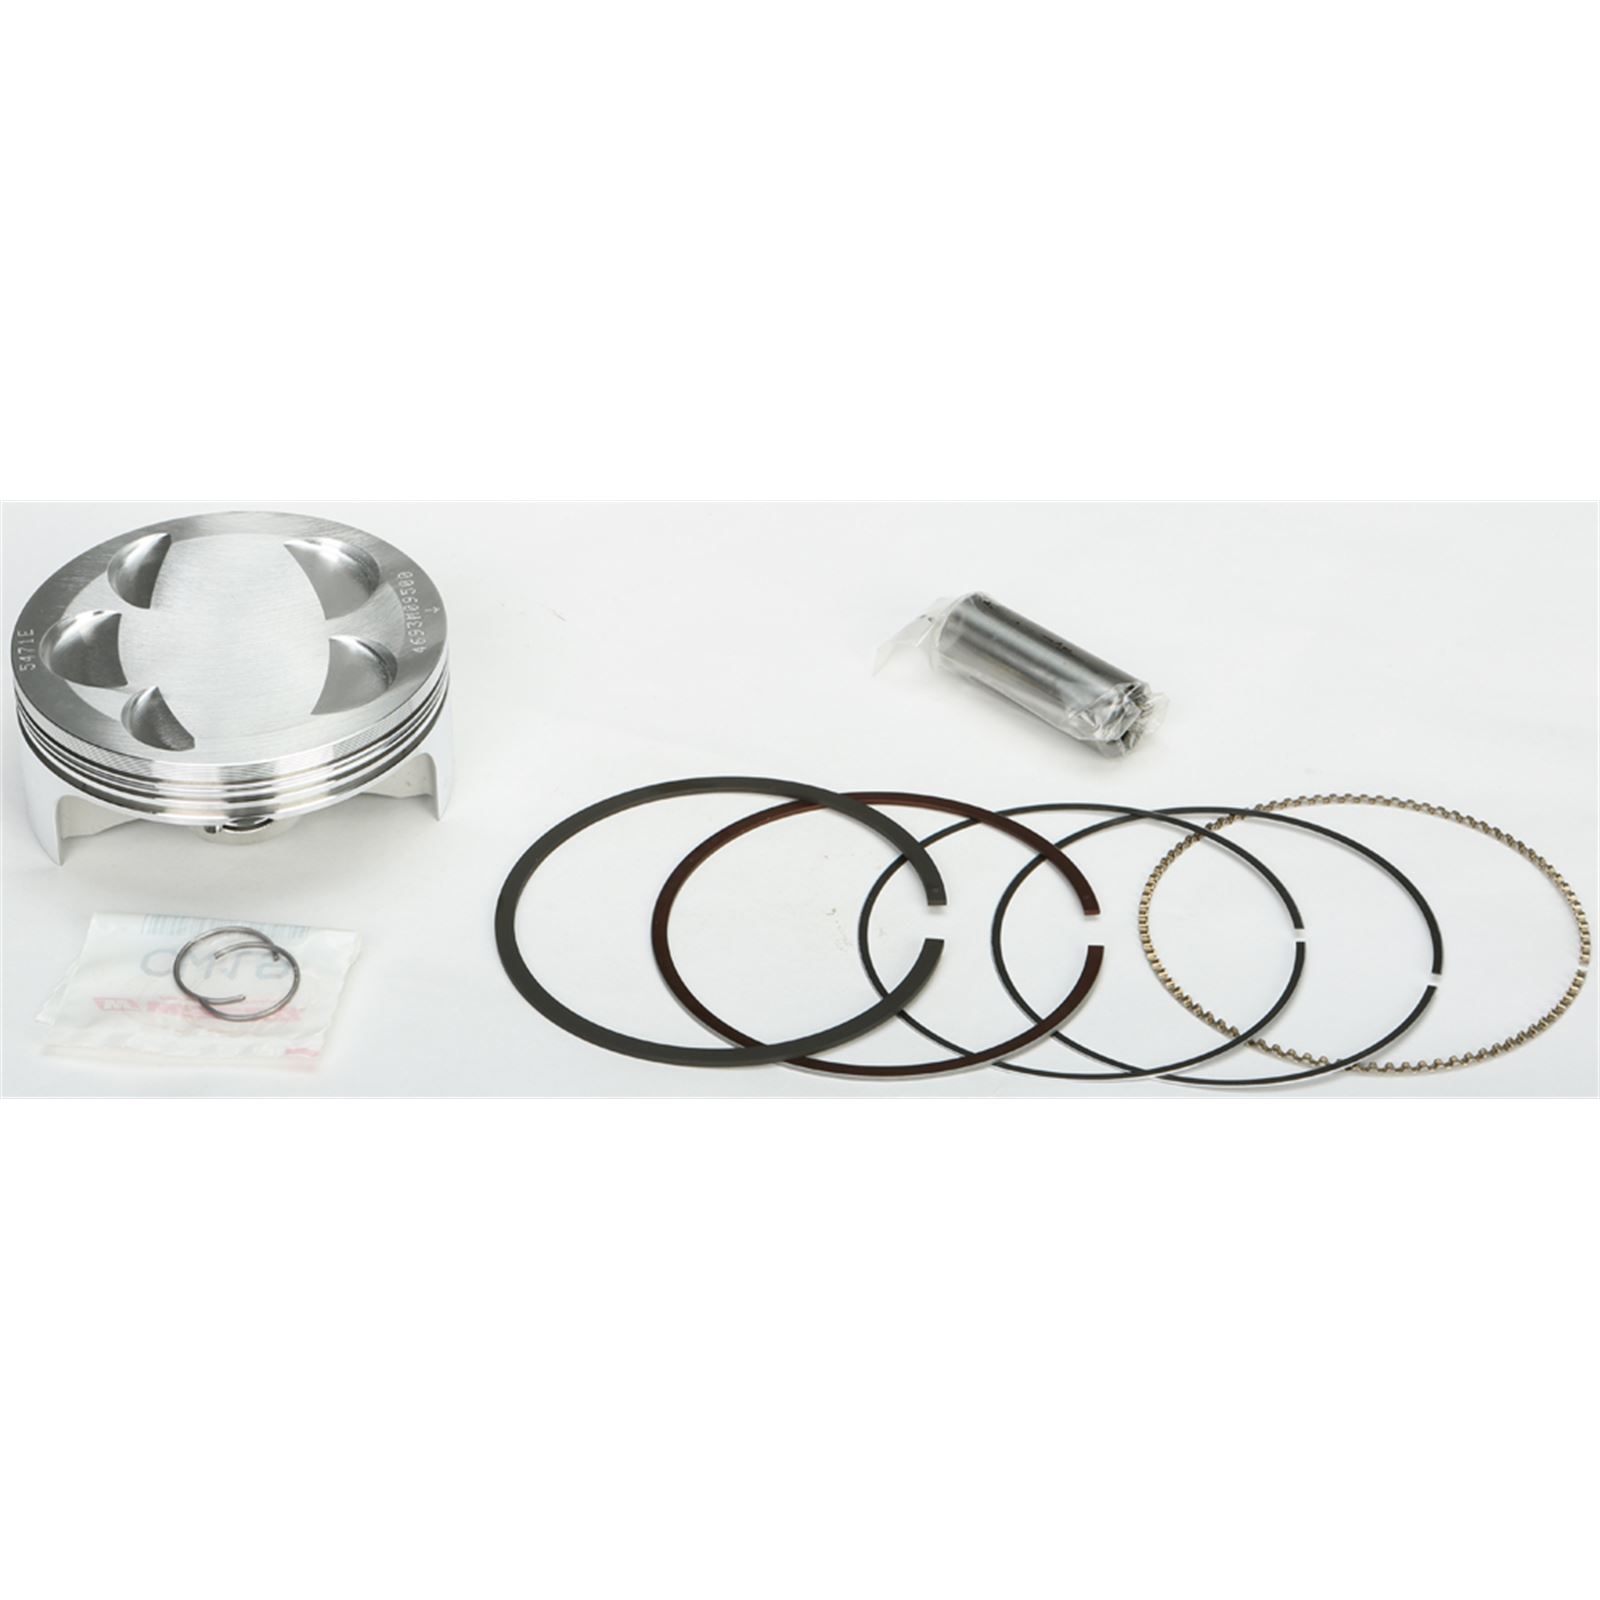 Ring Set For 1997 Honda CR80R Offroad Motorcycle Wiseco 1929CS